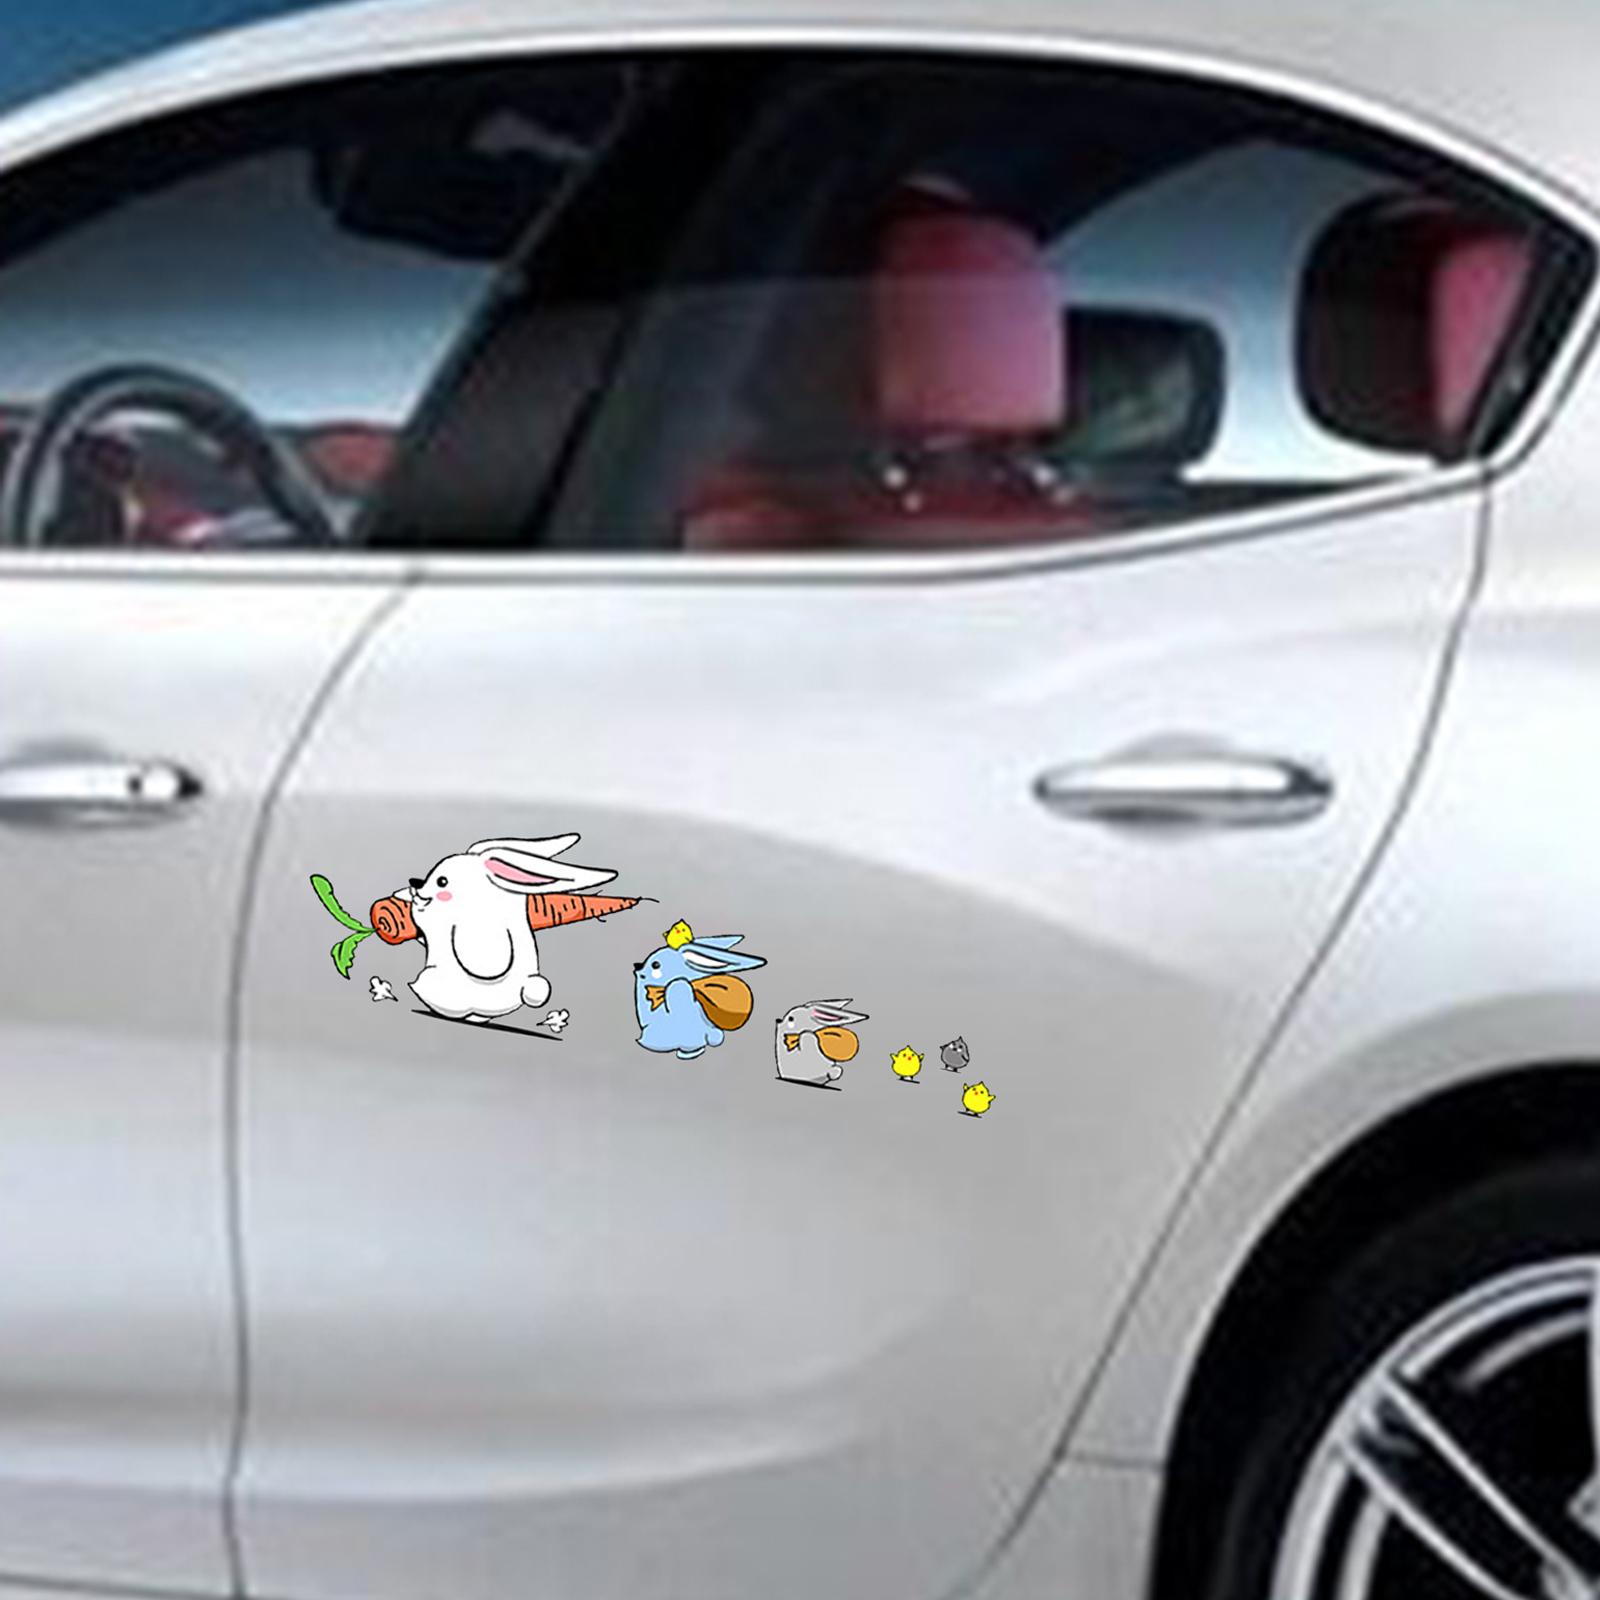 Bunny Car Stickers Car Window Decals Graphic for Cars Windows Vehicles Left L